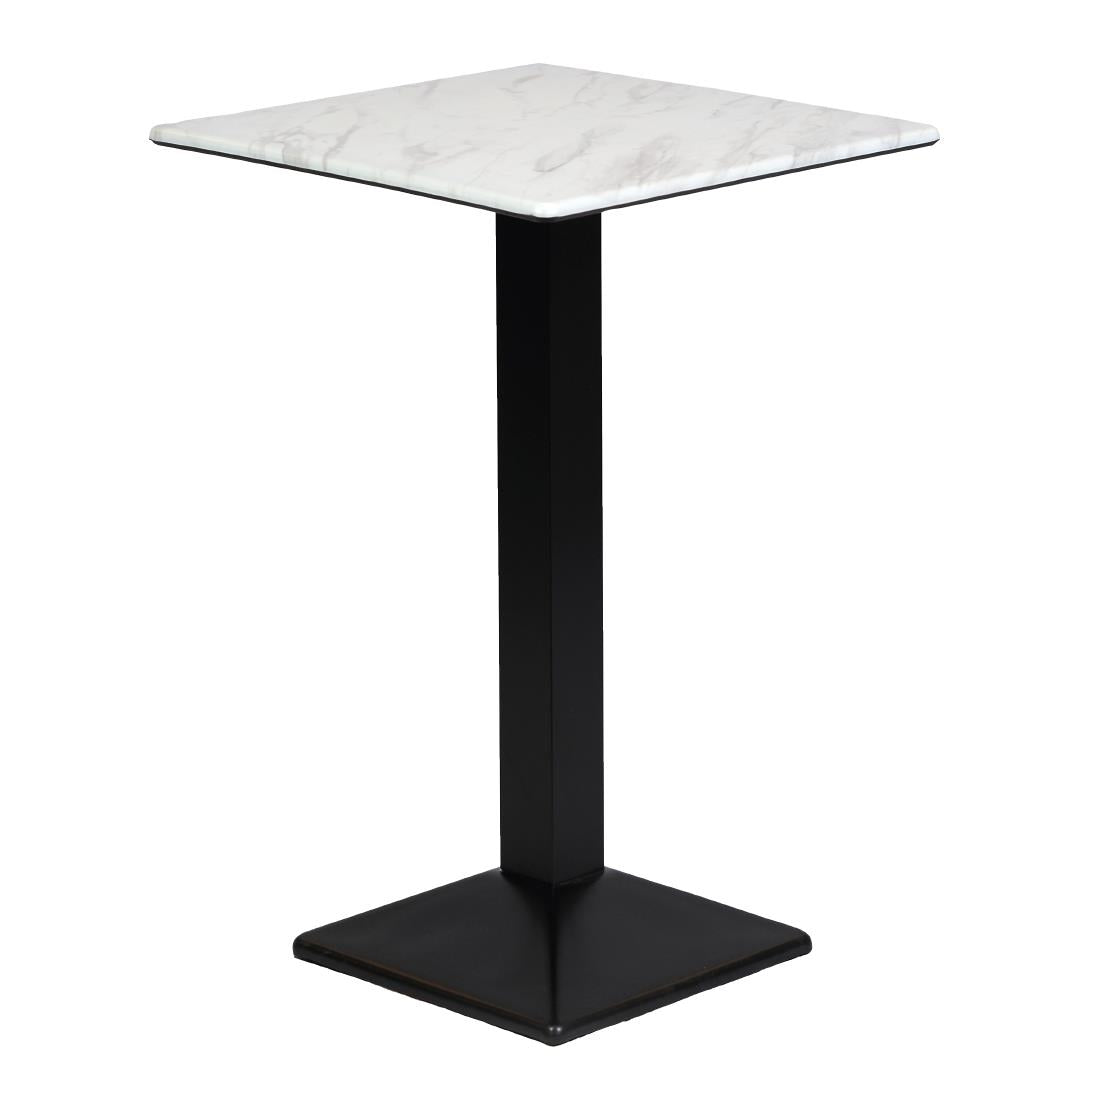 CZ826 Turin Metal Base Square Poseur Table with Laminate Top Marble 600mm JD Catering Equipment Solutions Ltd